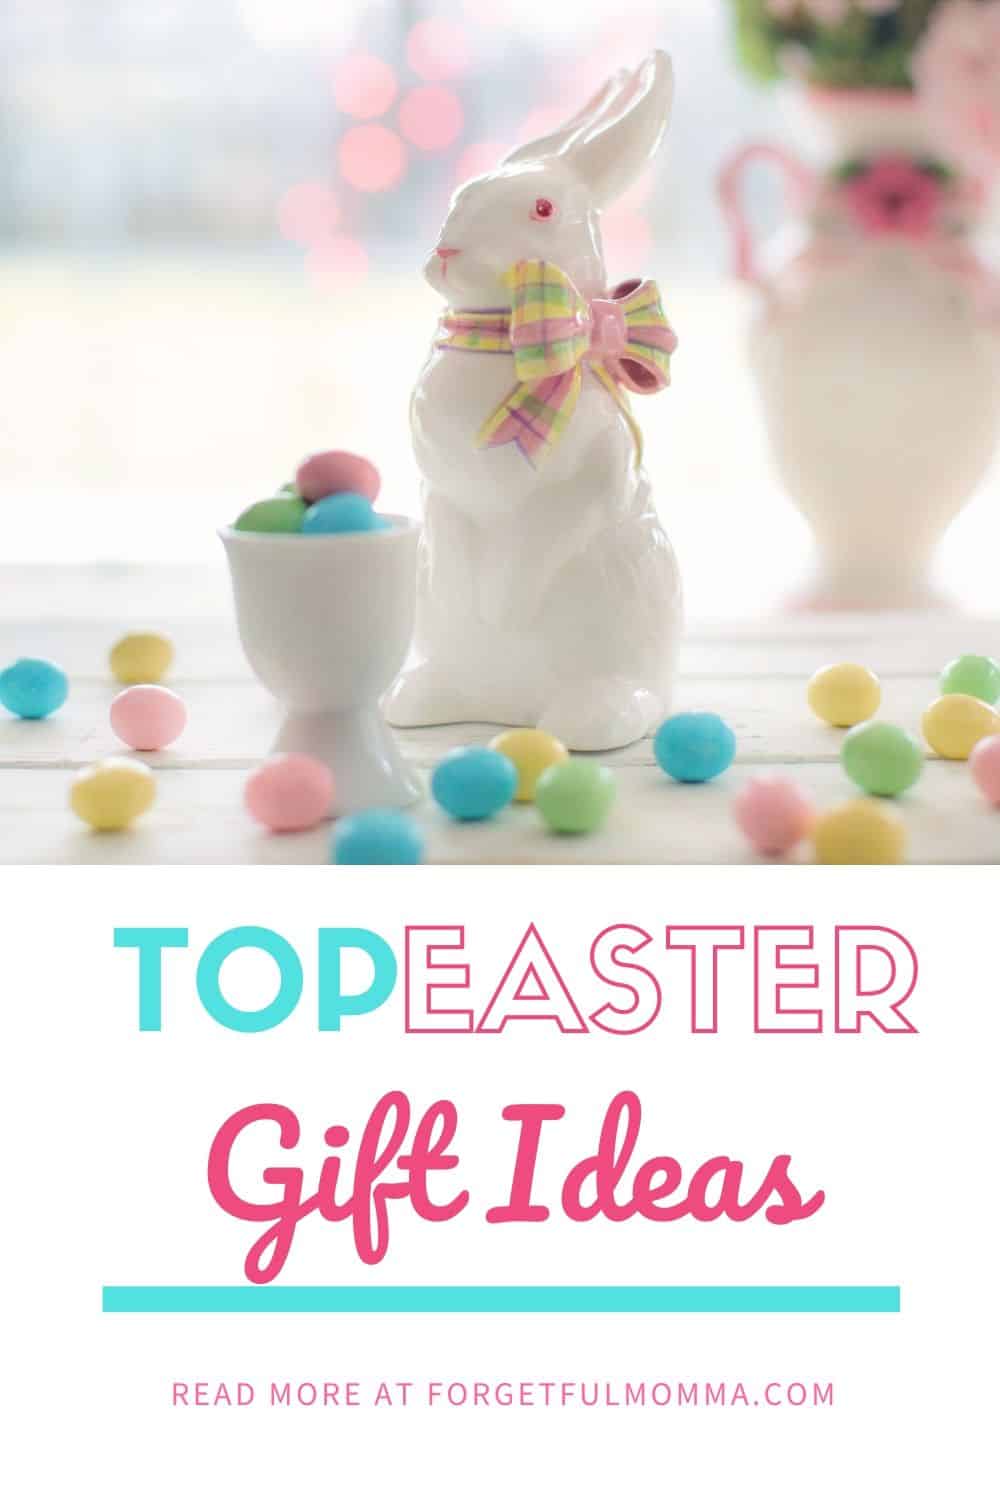 Top Easter Gifts - Ideas to Get You Started